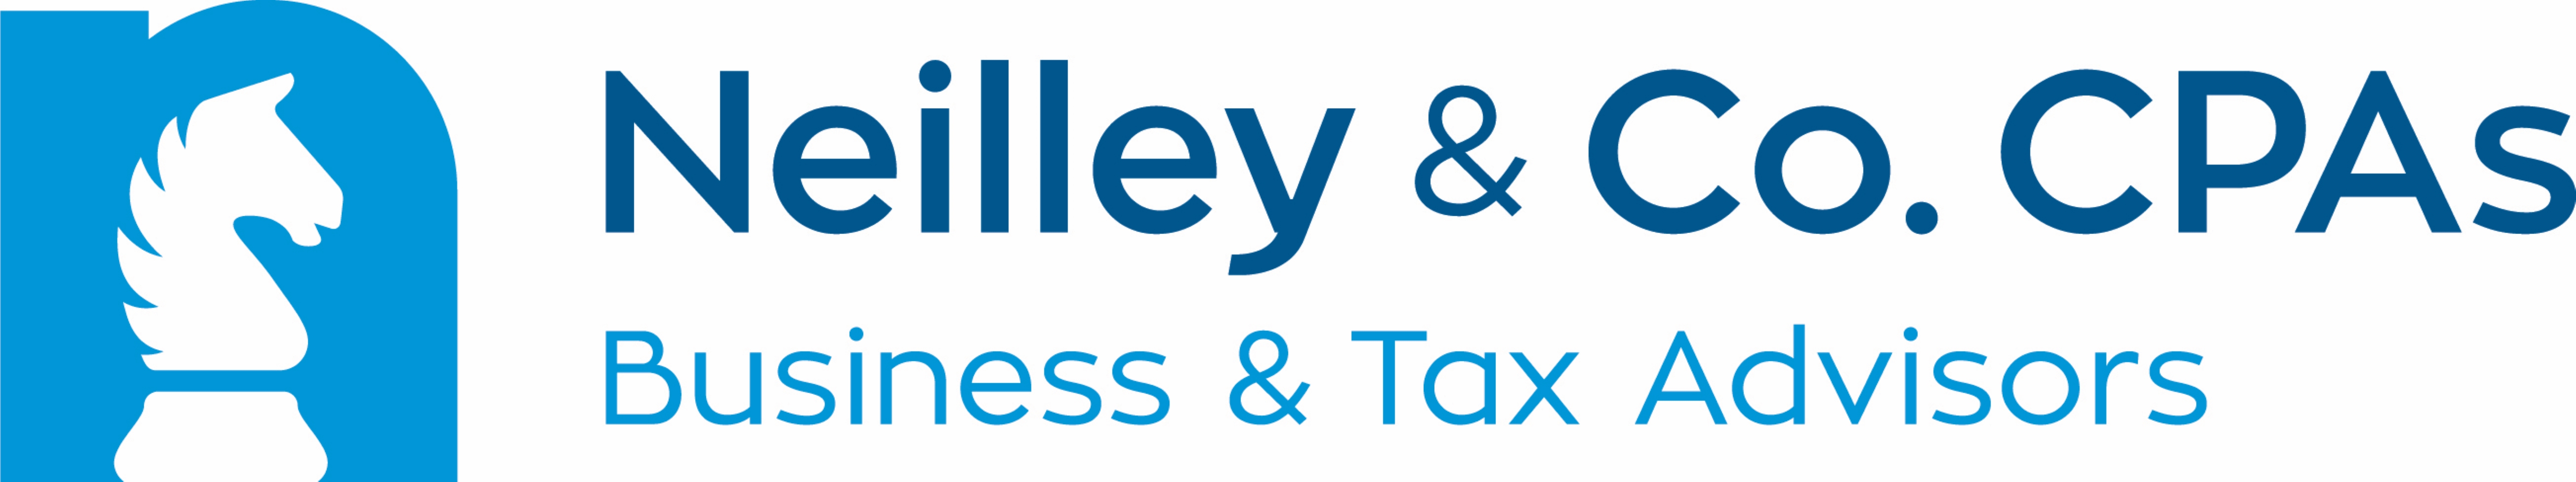 Neilley and Co.-logo smaller (002)